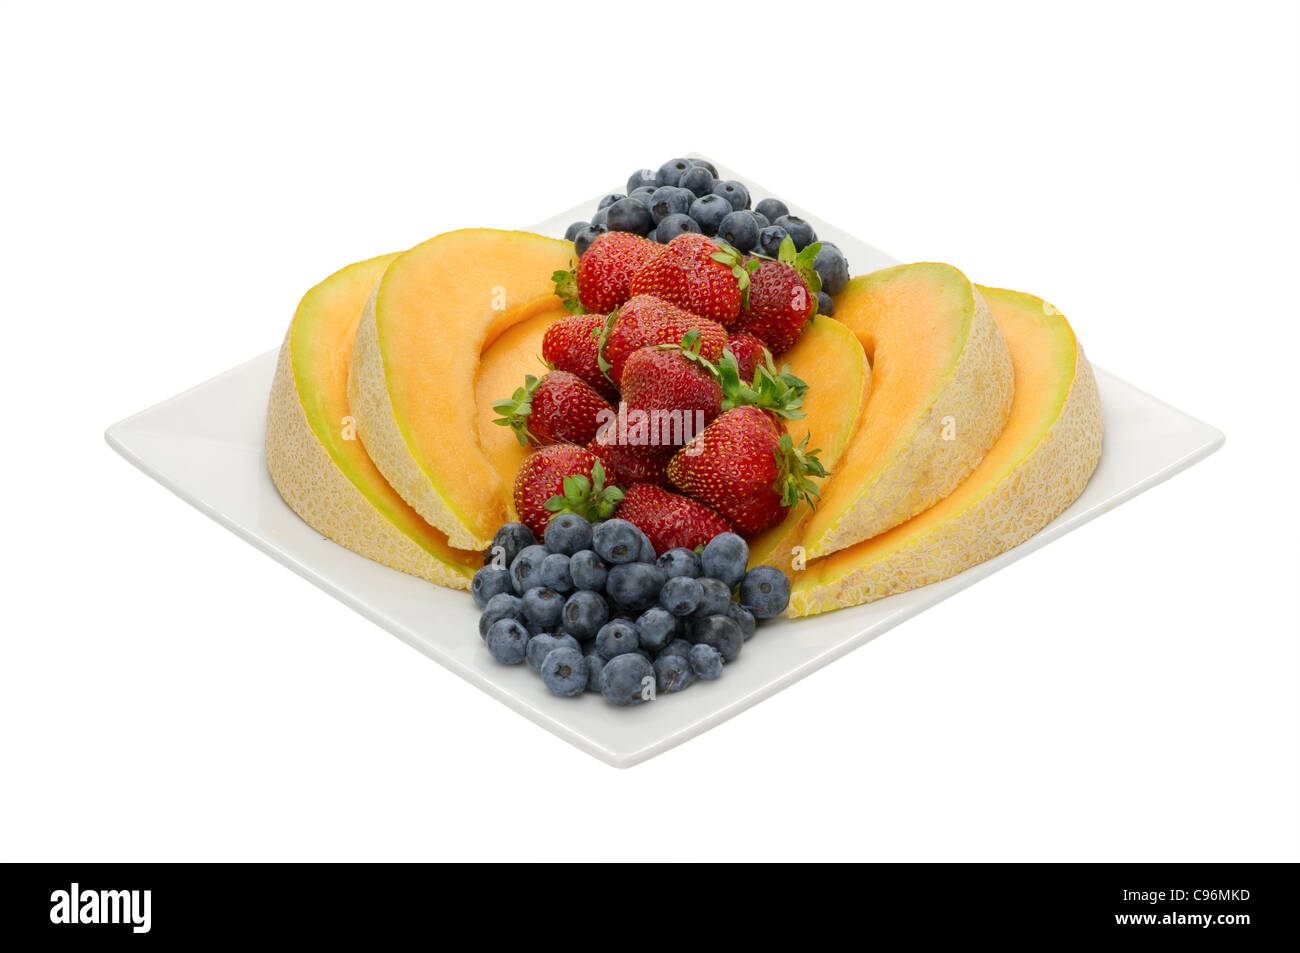 Fruit desert of strawberries and blueberries and cantaloupe on white plate isolated on white Stock Photo